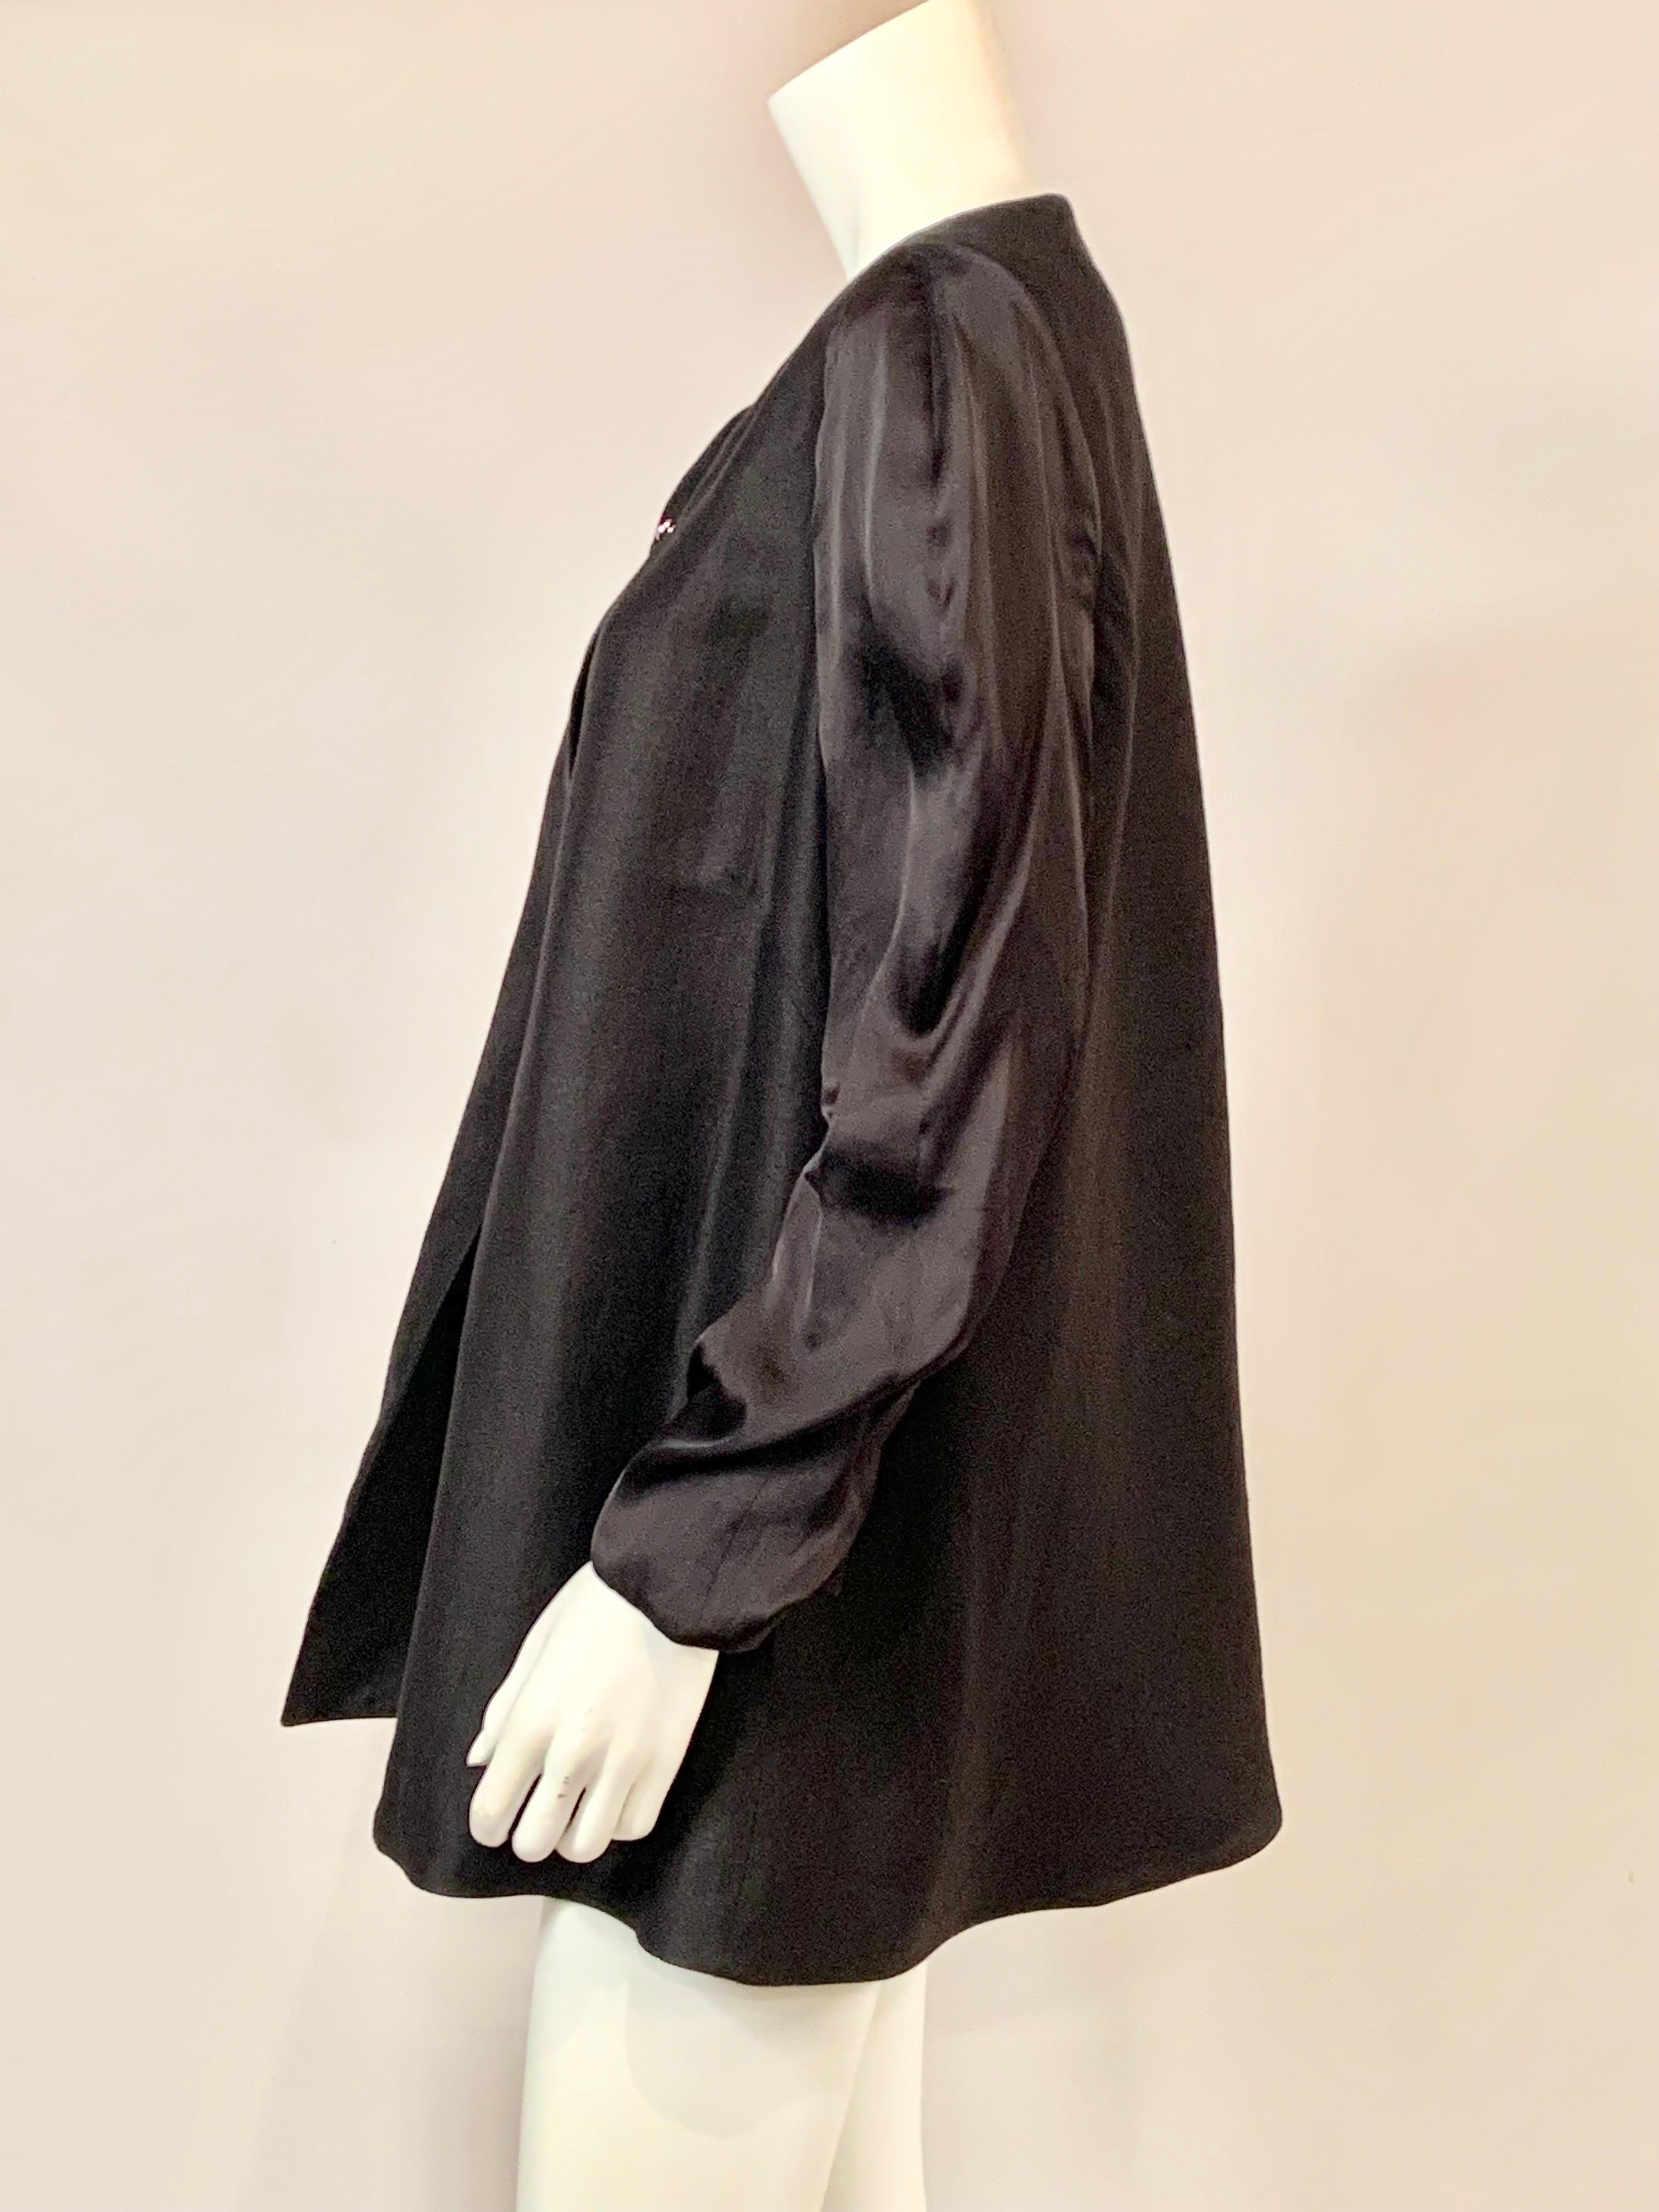 Giorgio Armani Black Linen Jacket with Silk Sleeves                              In Excellent Condition For Sale In New Hope, PA